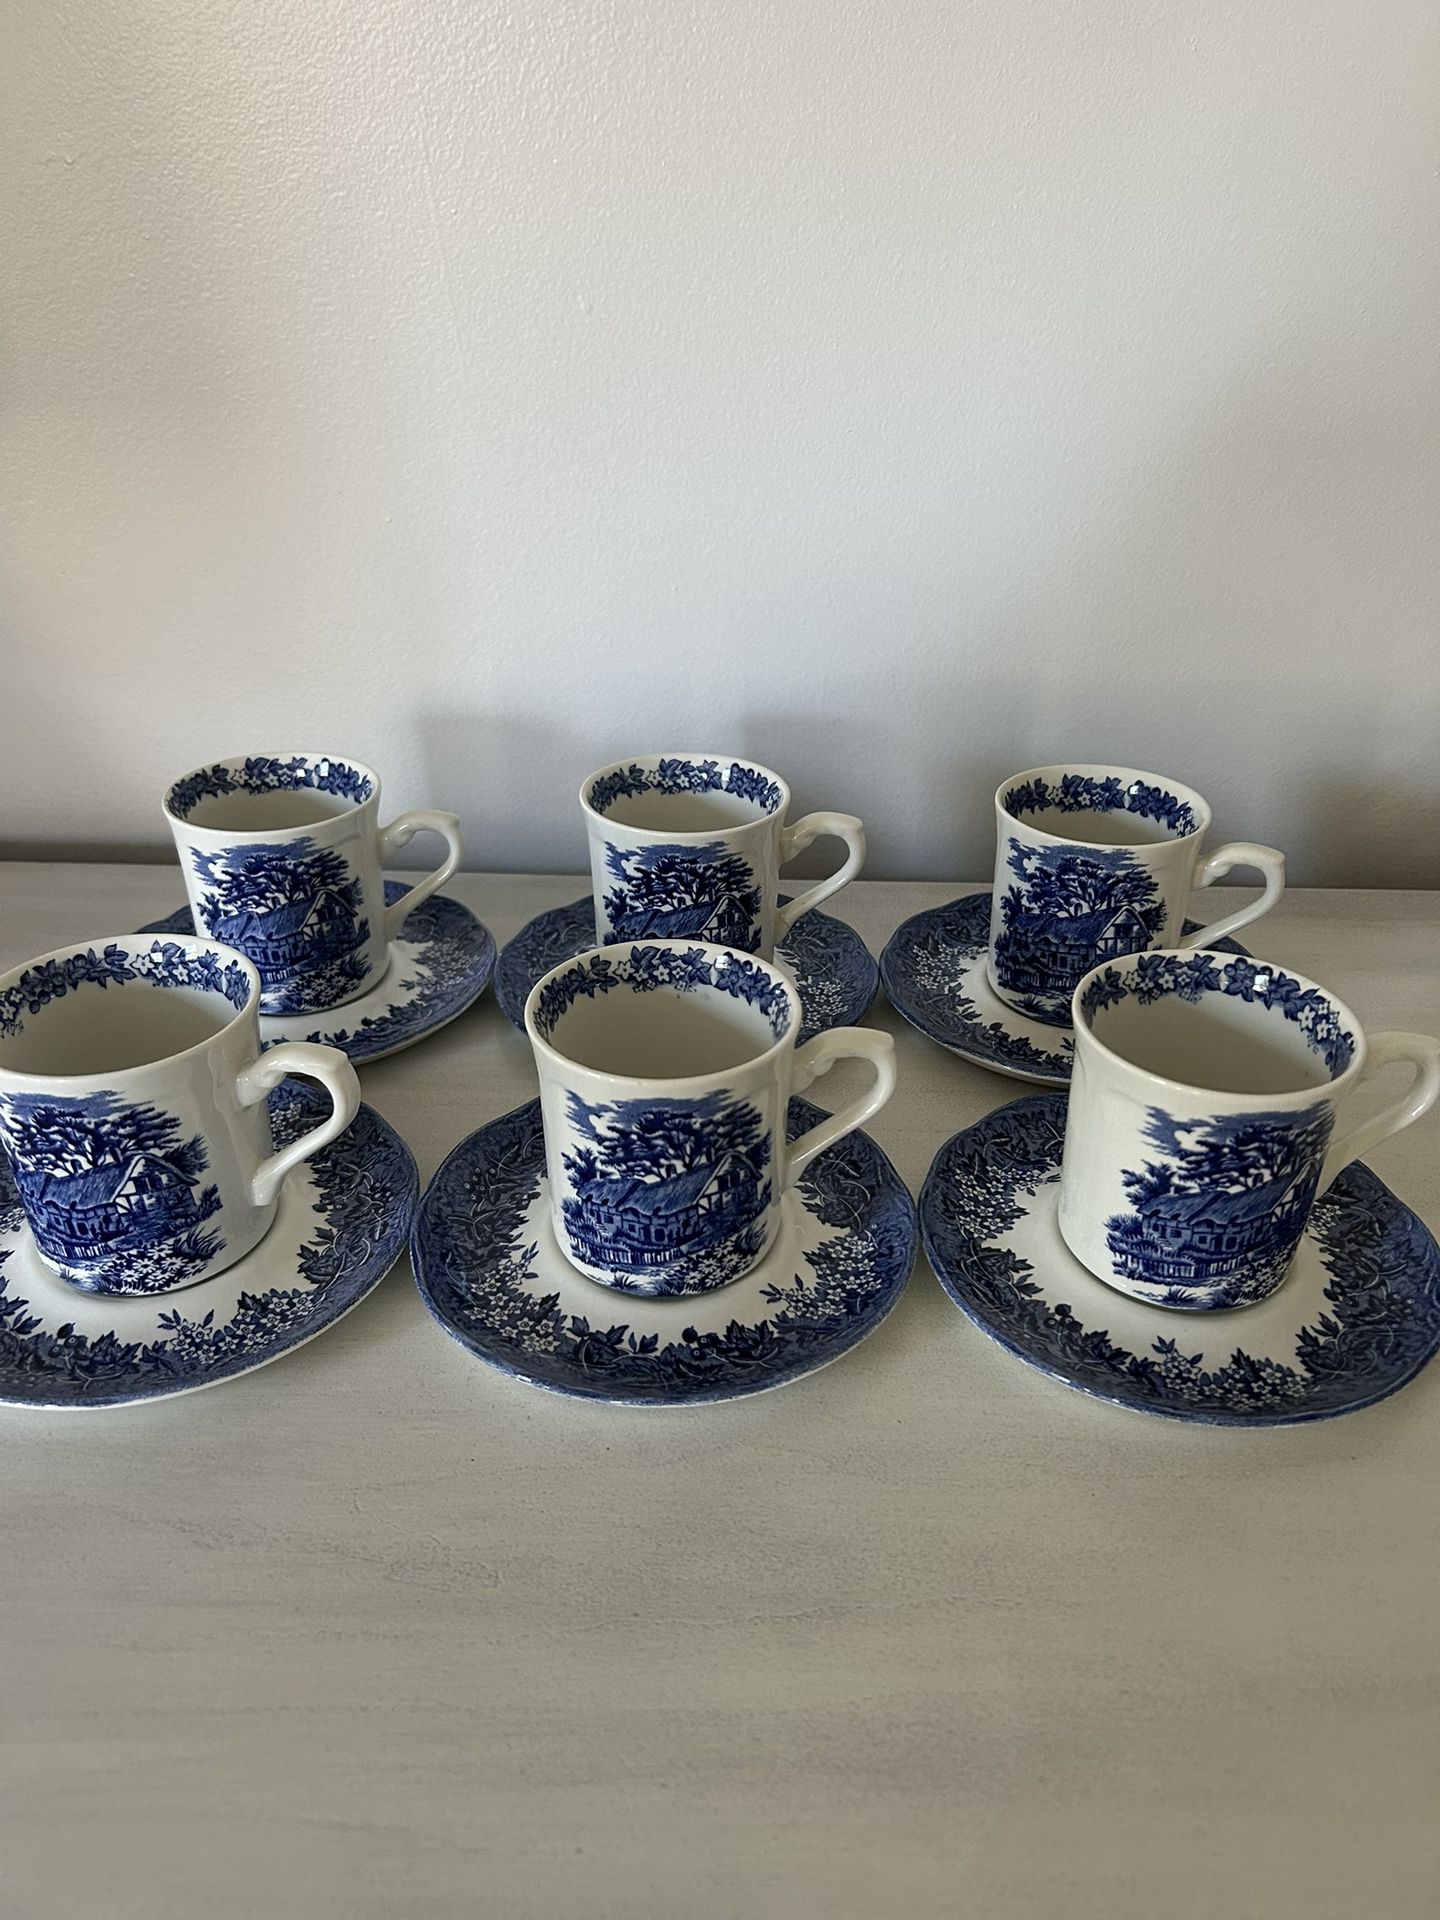 Six vintage blue & white romantic England mug and saucers (Anne Hathaway’s cottage), Made in England